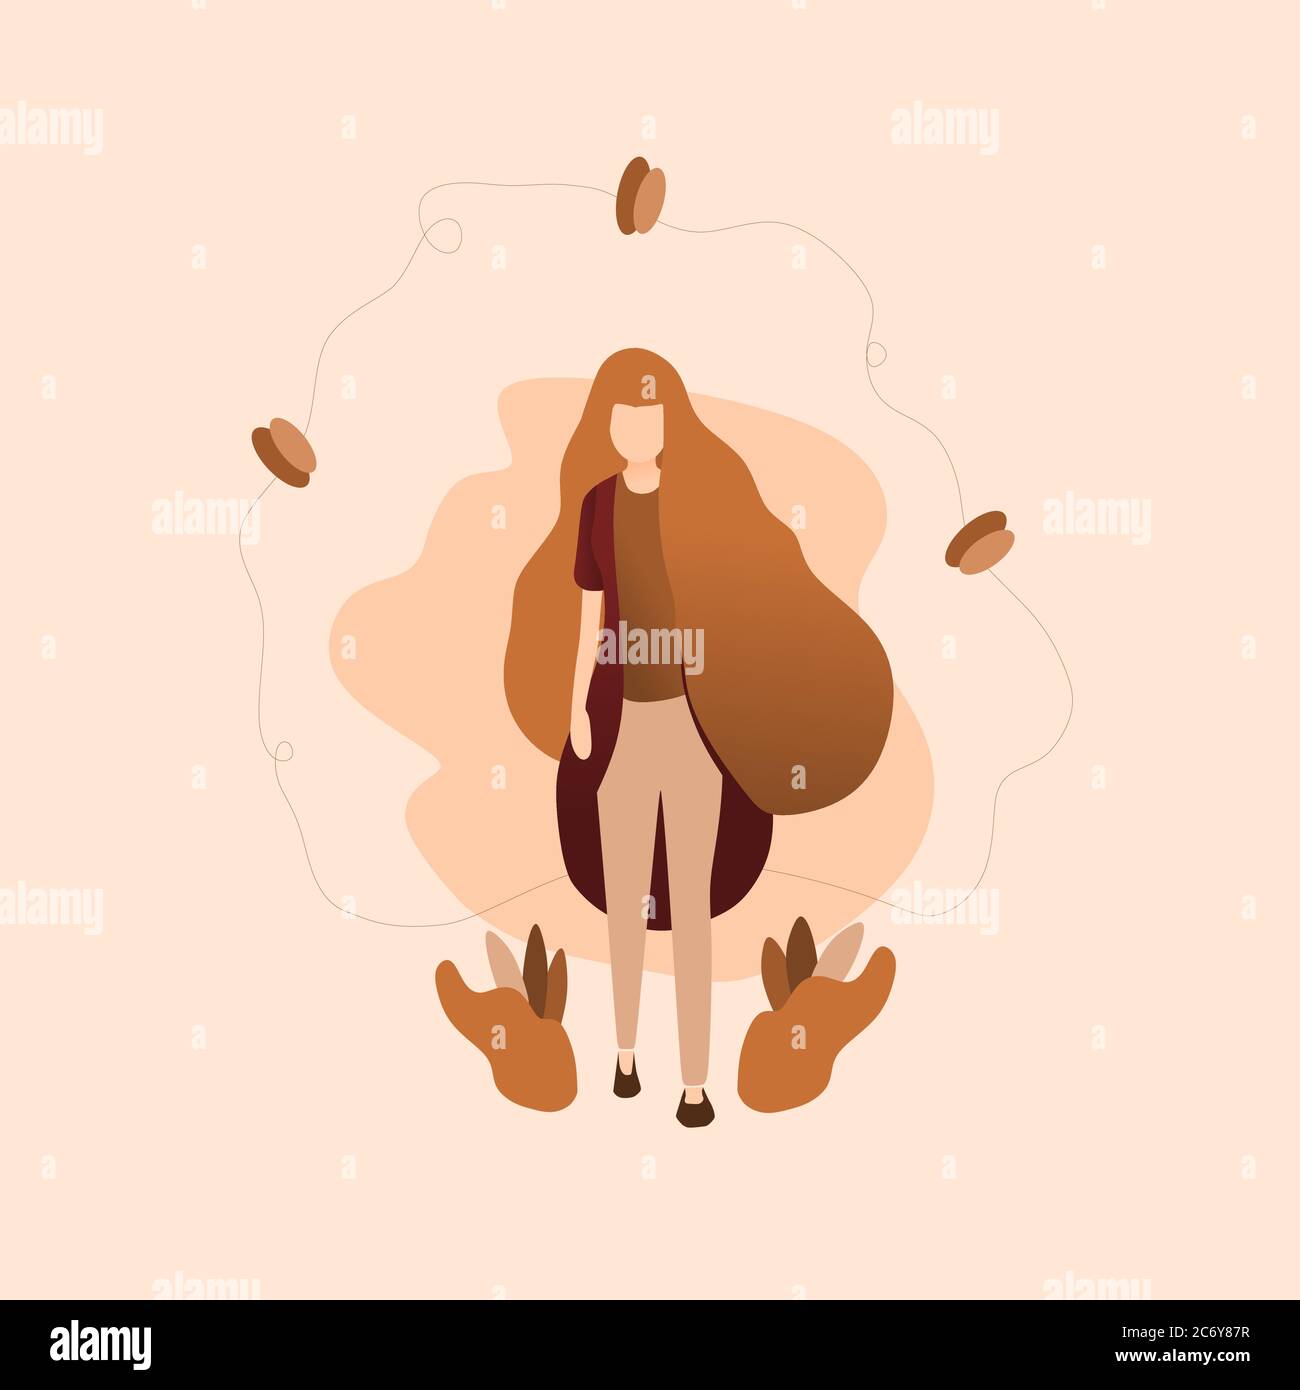 women illustration vector with brown theme Stock Vector